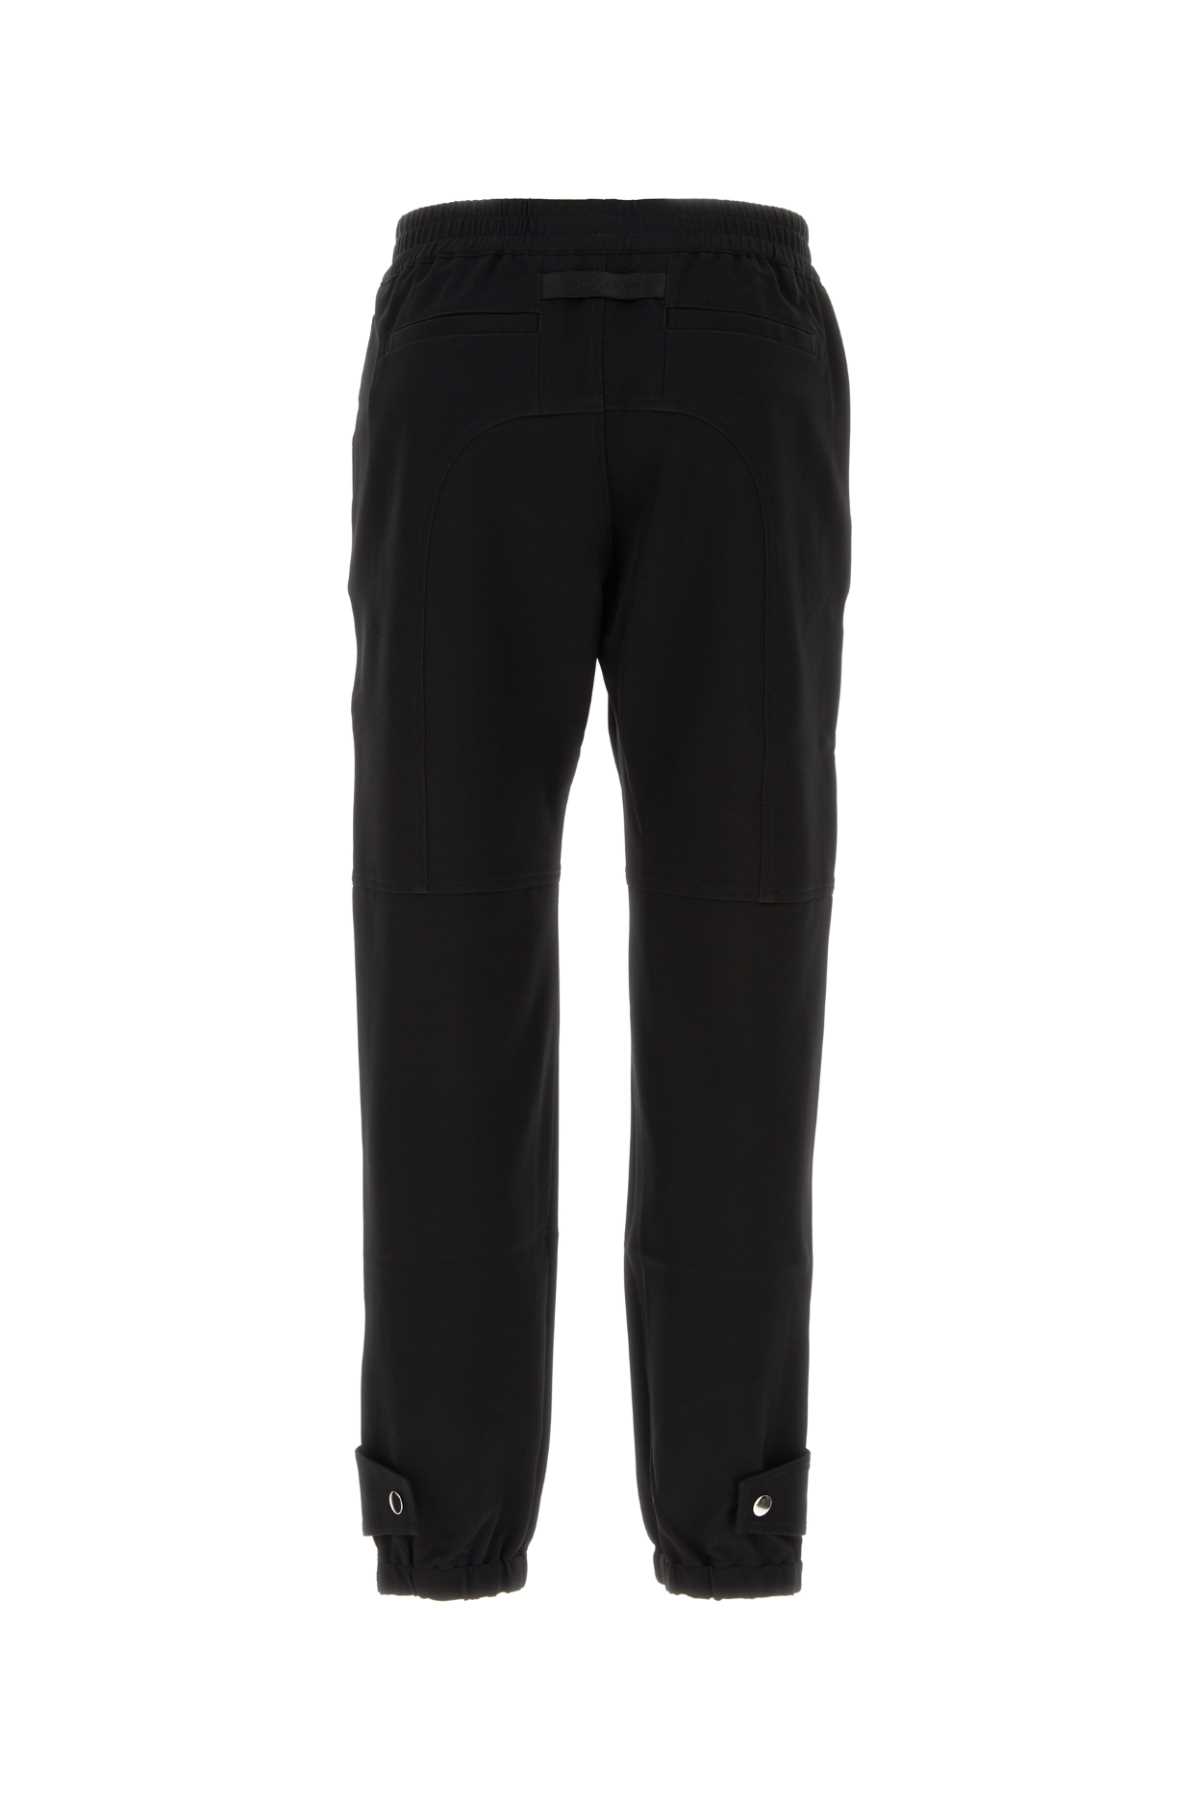 Alyx Black Stretch Polyester Blend Joggers In Blk0001